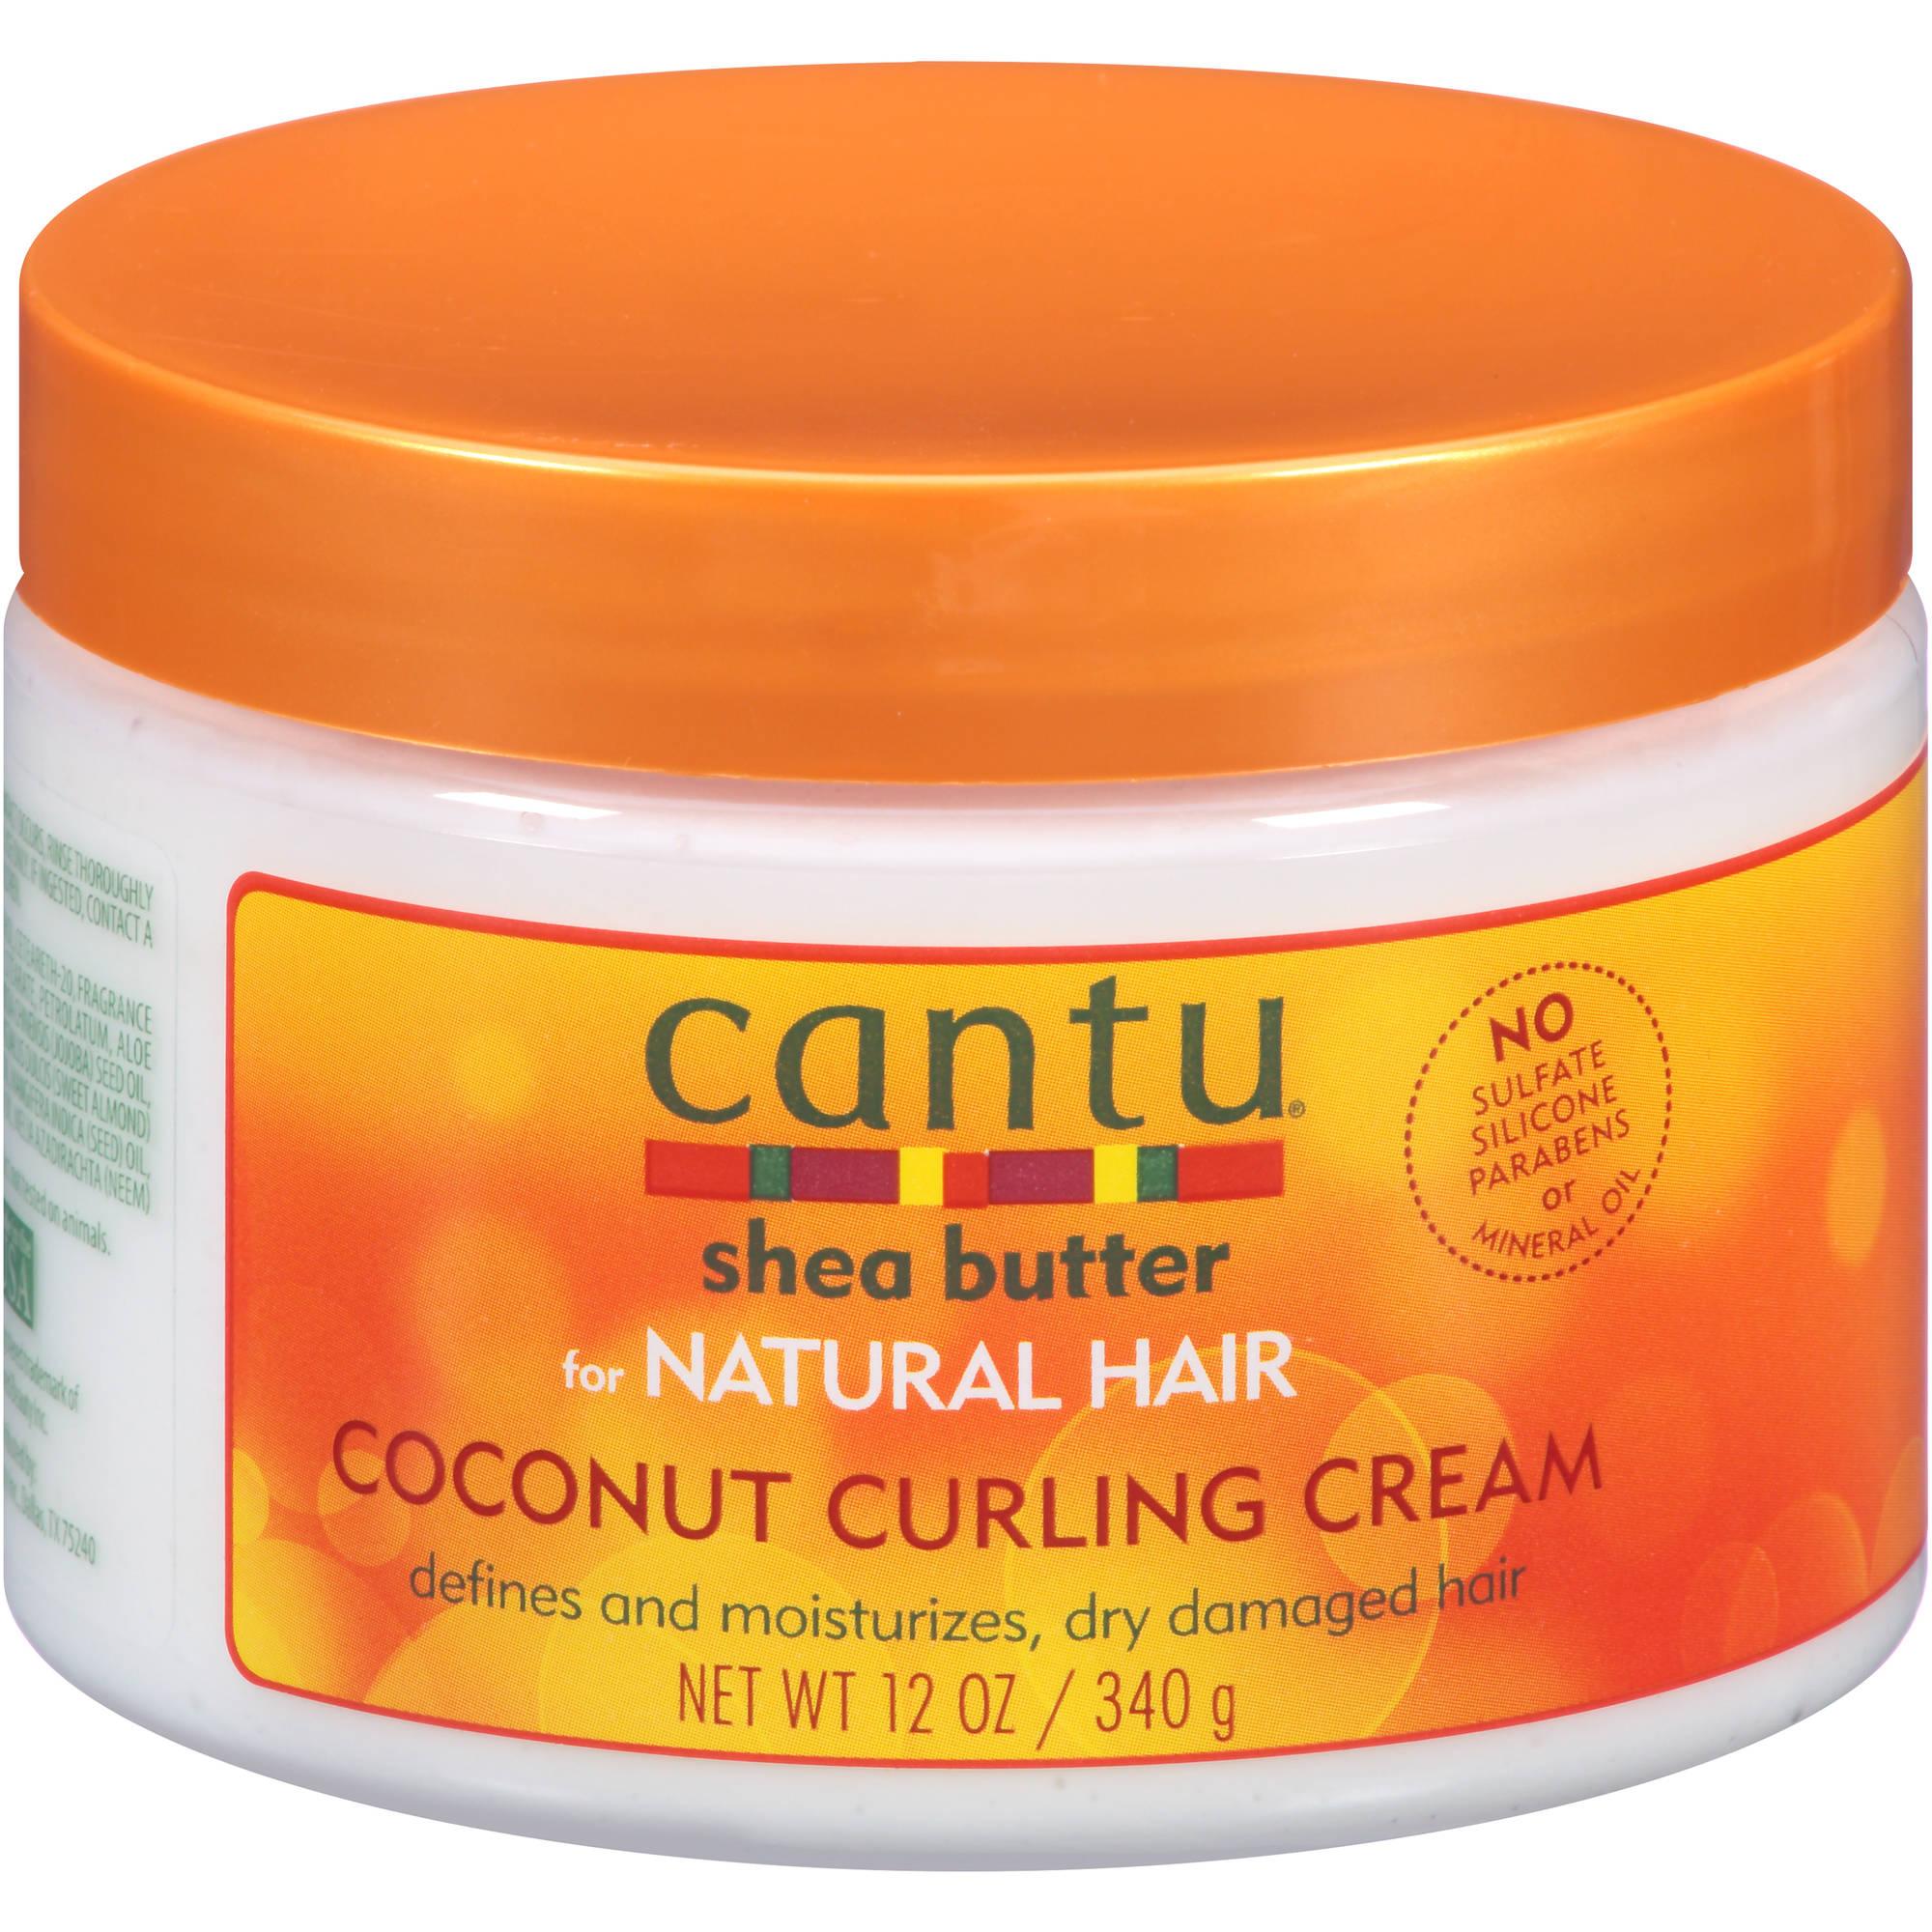 11 Best Curly Hair Products for Smooth, Shiny Frizz-Free Curls